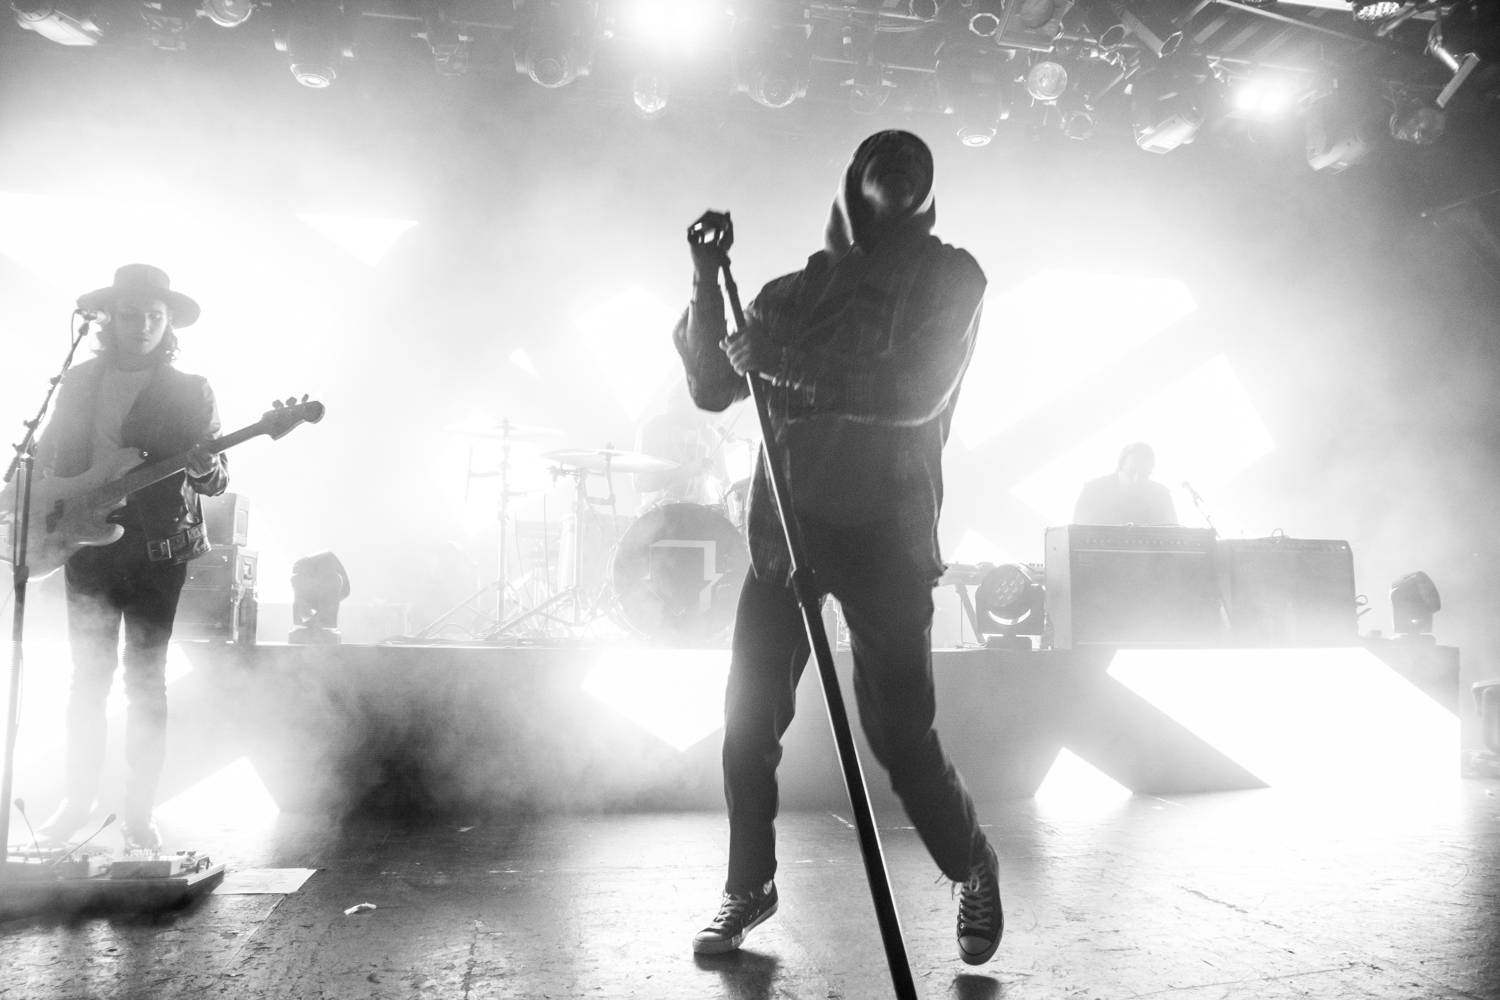 The Neighbourhood at the Commodore Ballroom, Vancouver, Oct 20 2015. Pavel Boiko photo.